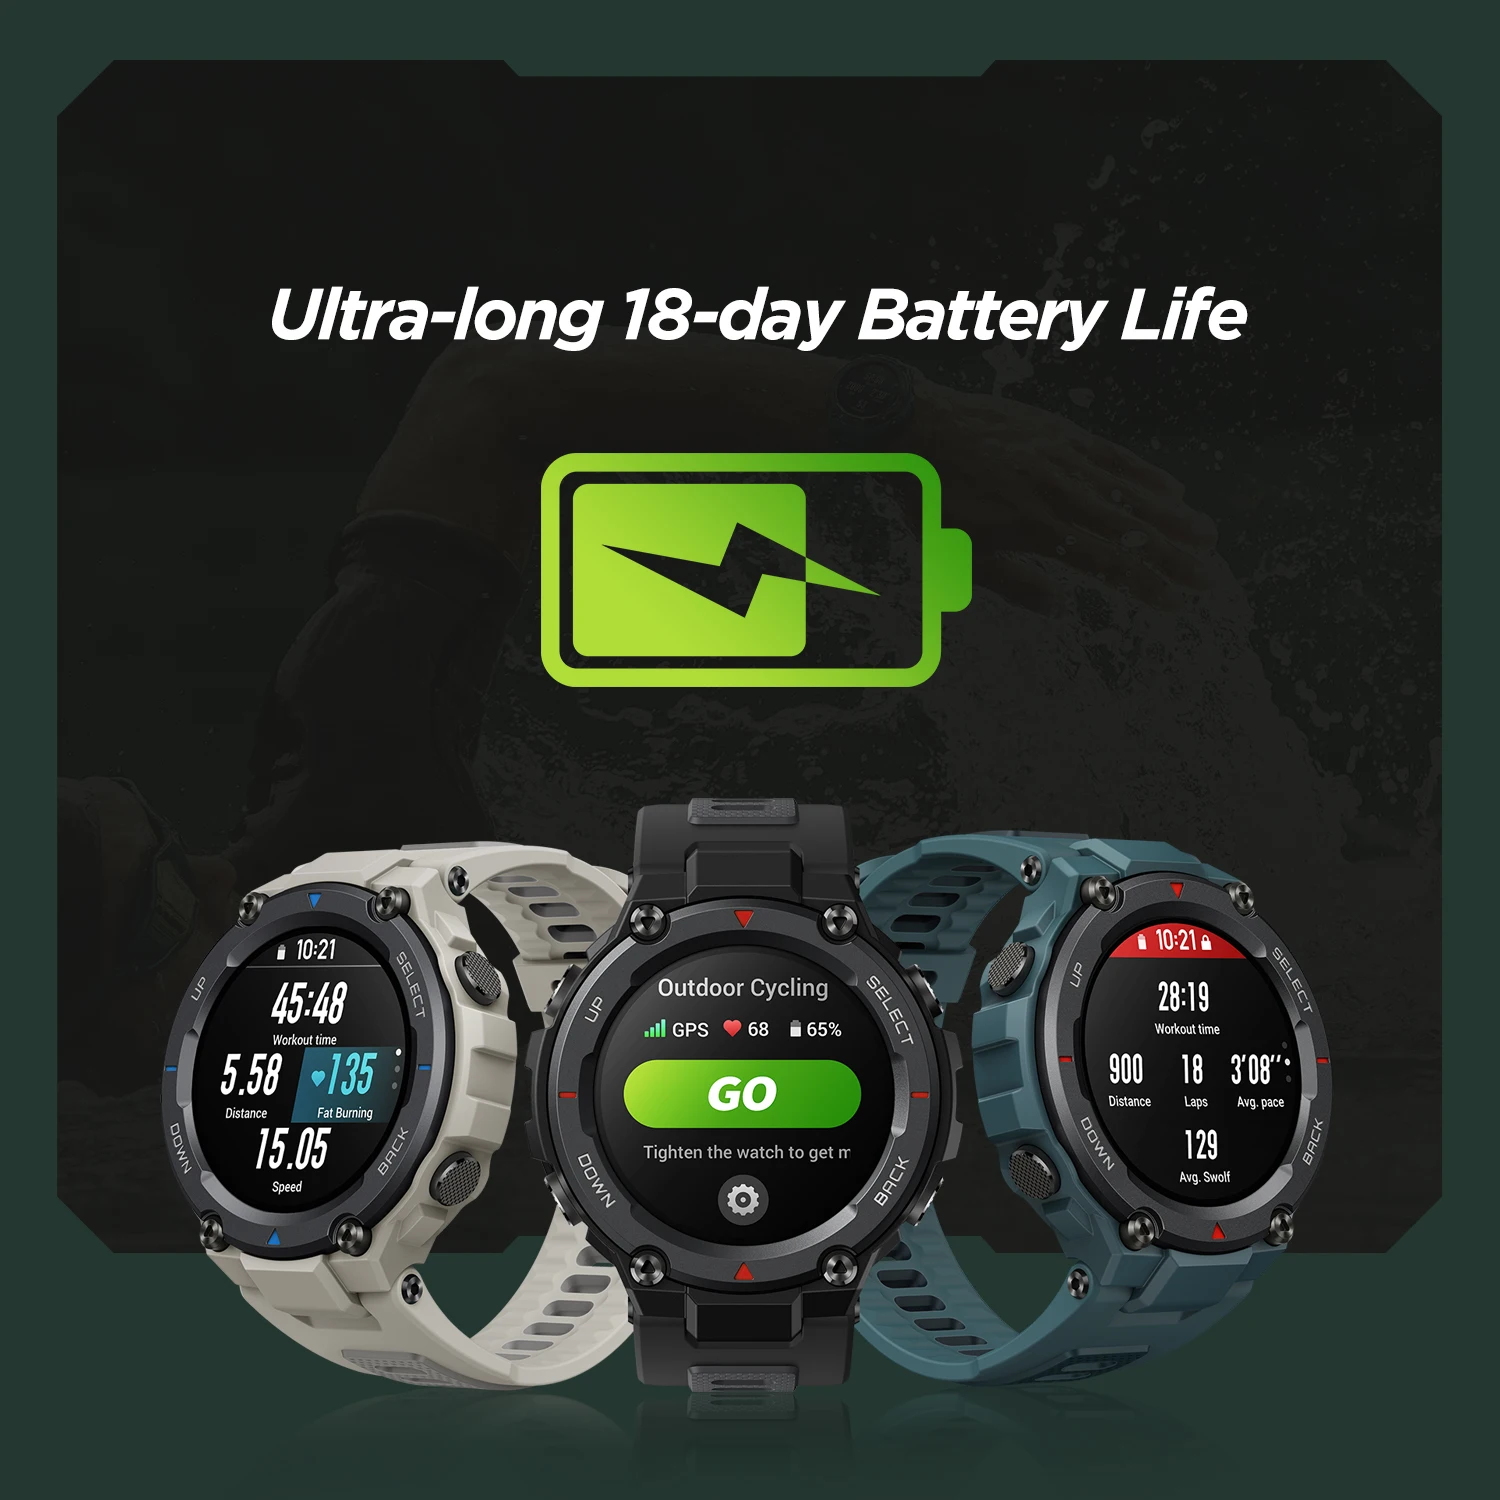 amazfit t rex trex pro t rex gps smartwatch outdoor waterproof 18 day battery life 390mah smart watch for android ios phone free global shipping